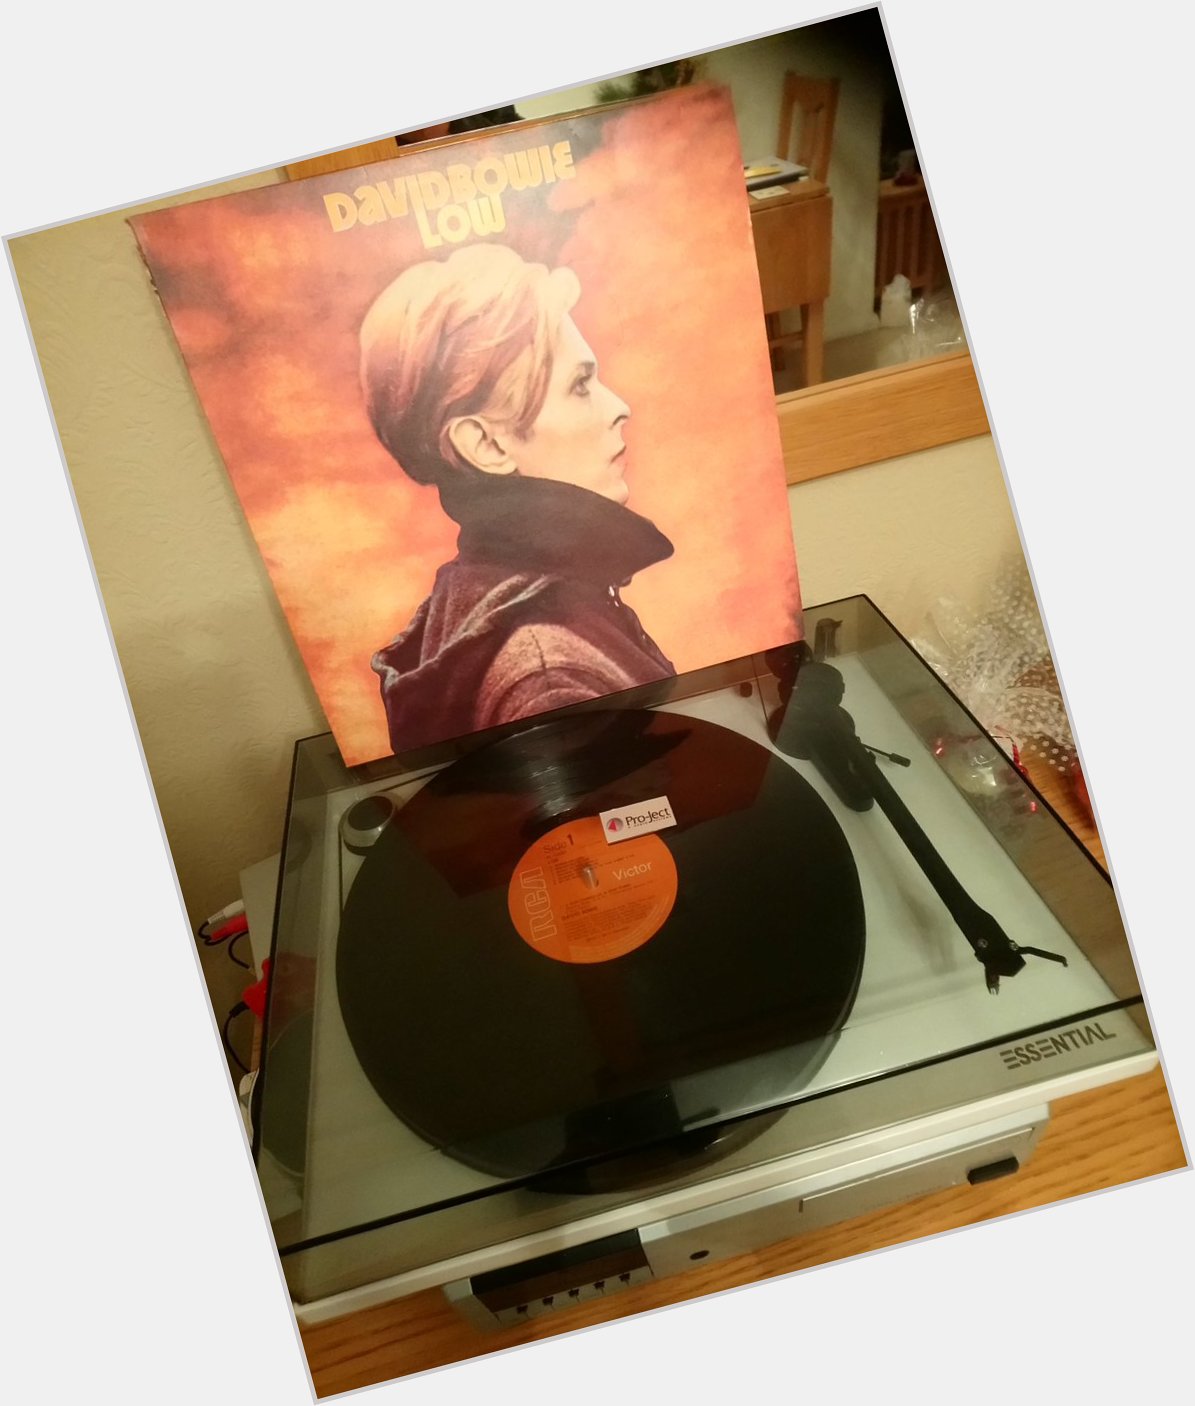 Happy 42nd birthday to my favourite David Bowie album and also in my top ten albums of all time. 